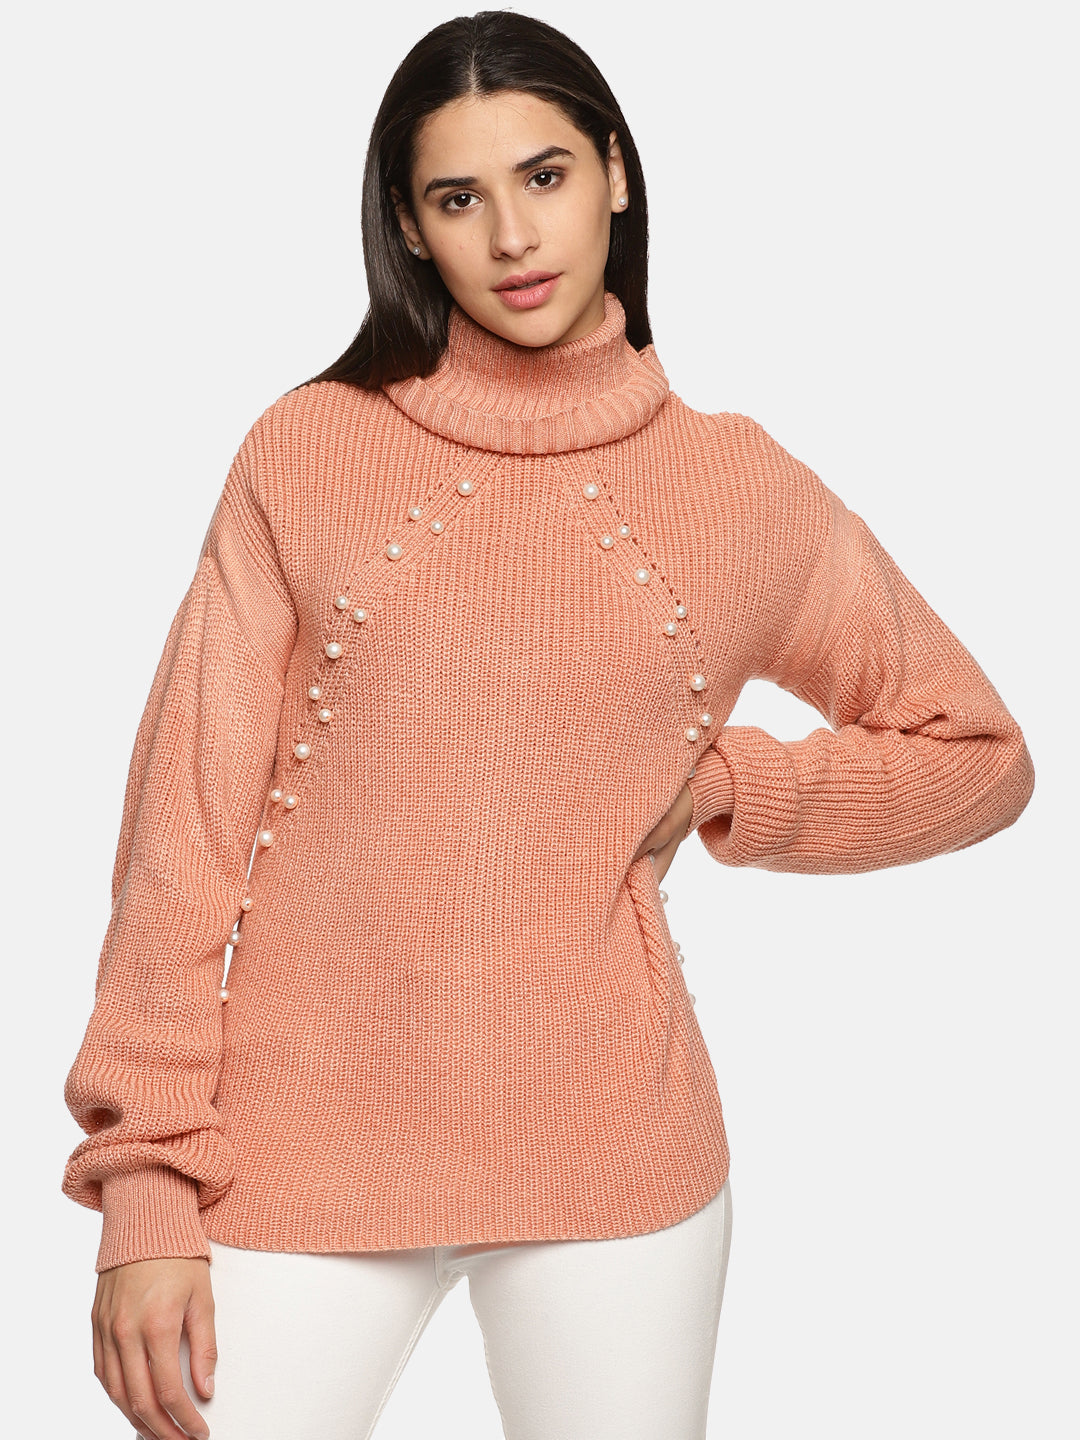 IS.U Peach Pearl High Neck Oversized Knitted Sweater